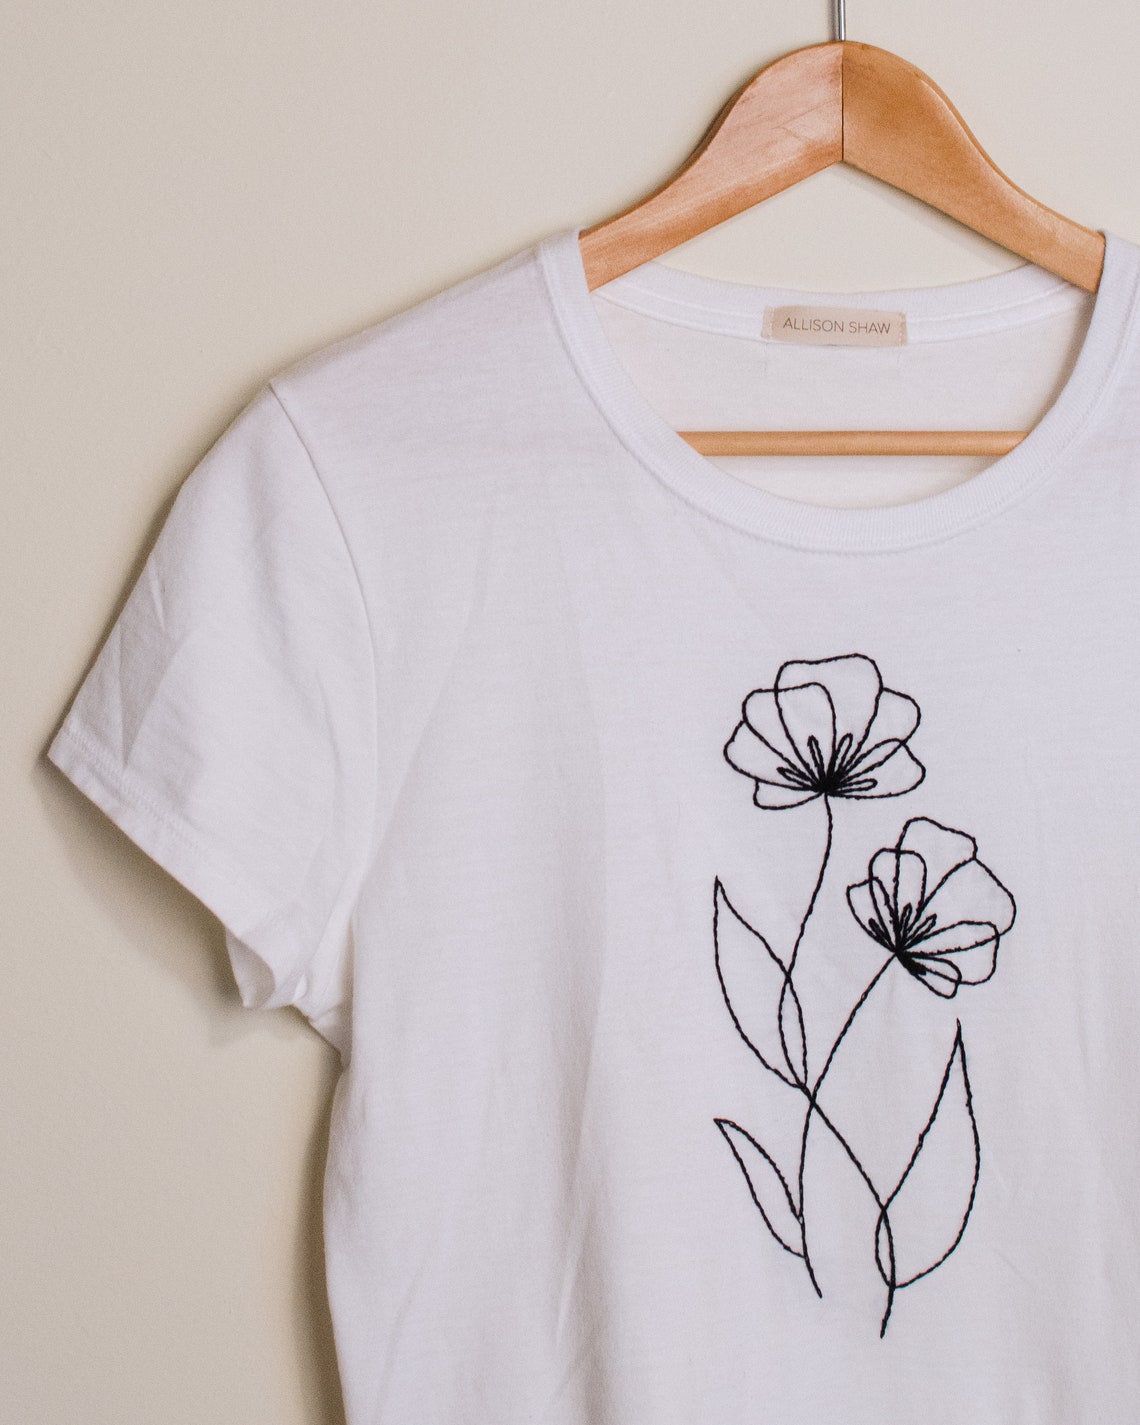 Line Art Flower Tee Hand Embroidered T-Shirt Floral Tee | Etsy